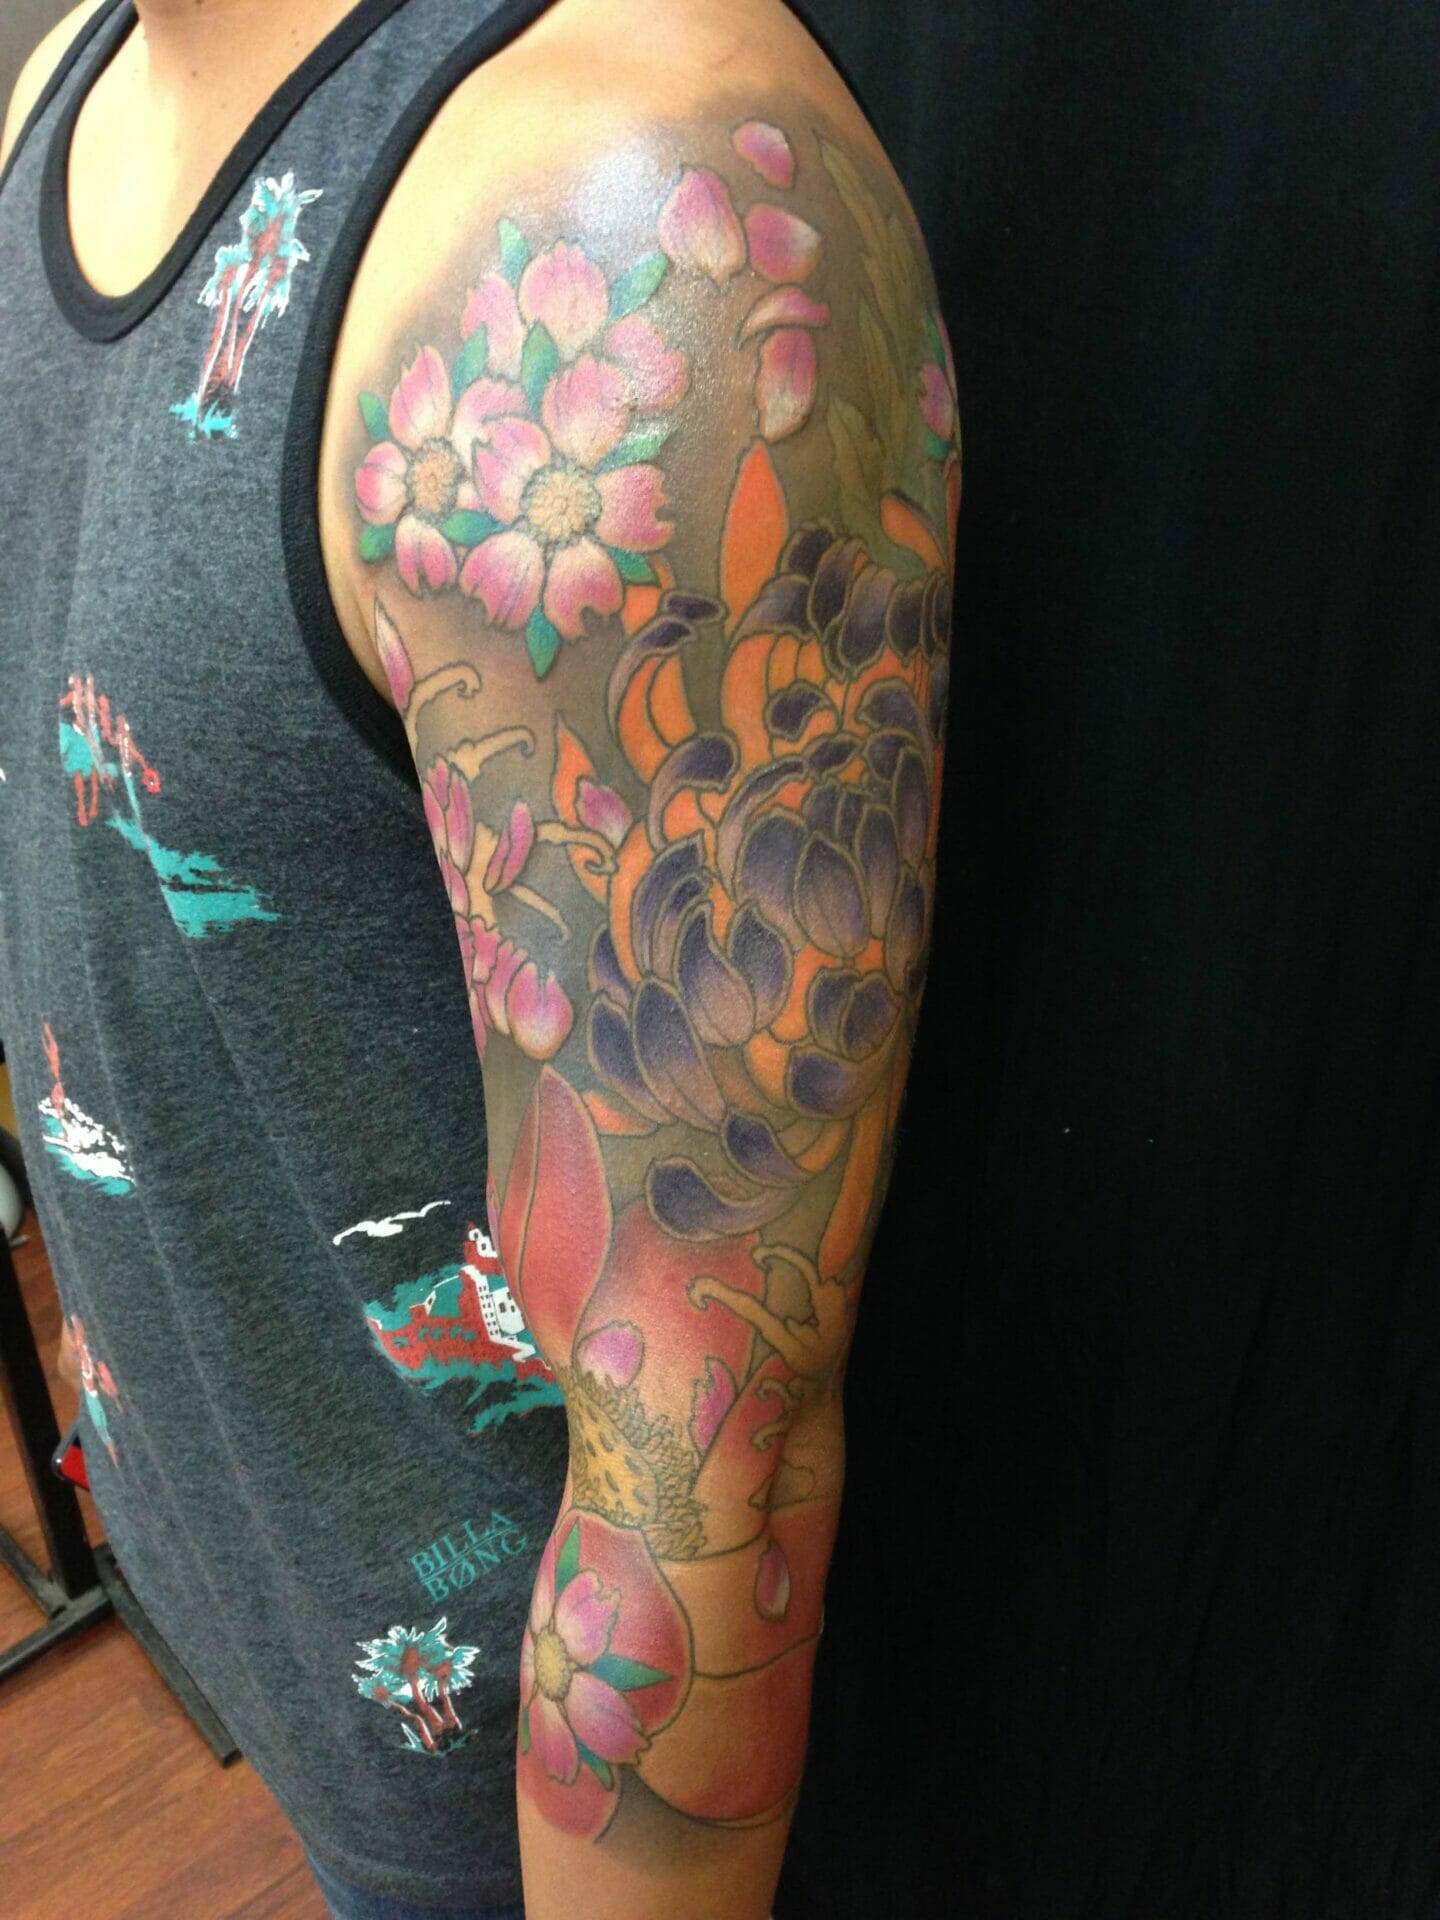 Japanese style tattooing - Tattoos and the tattooed